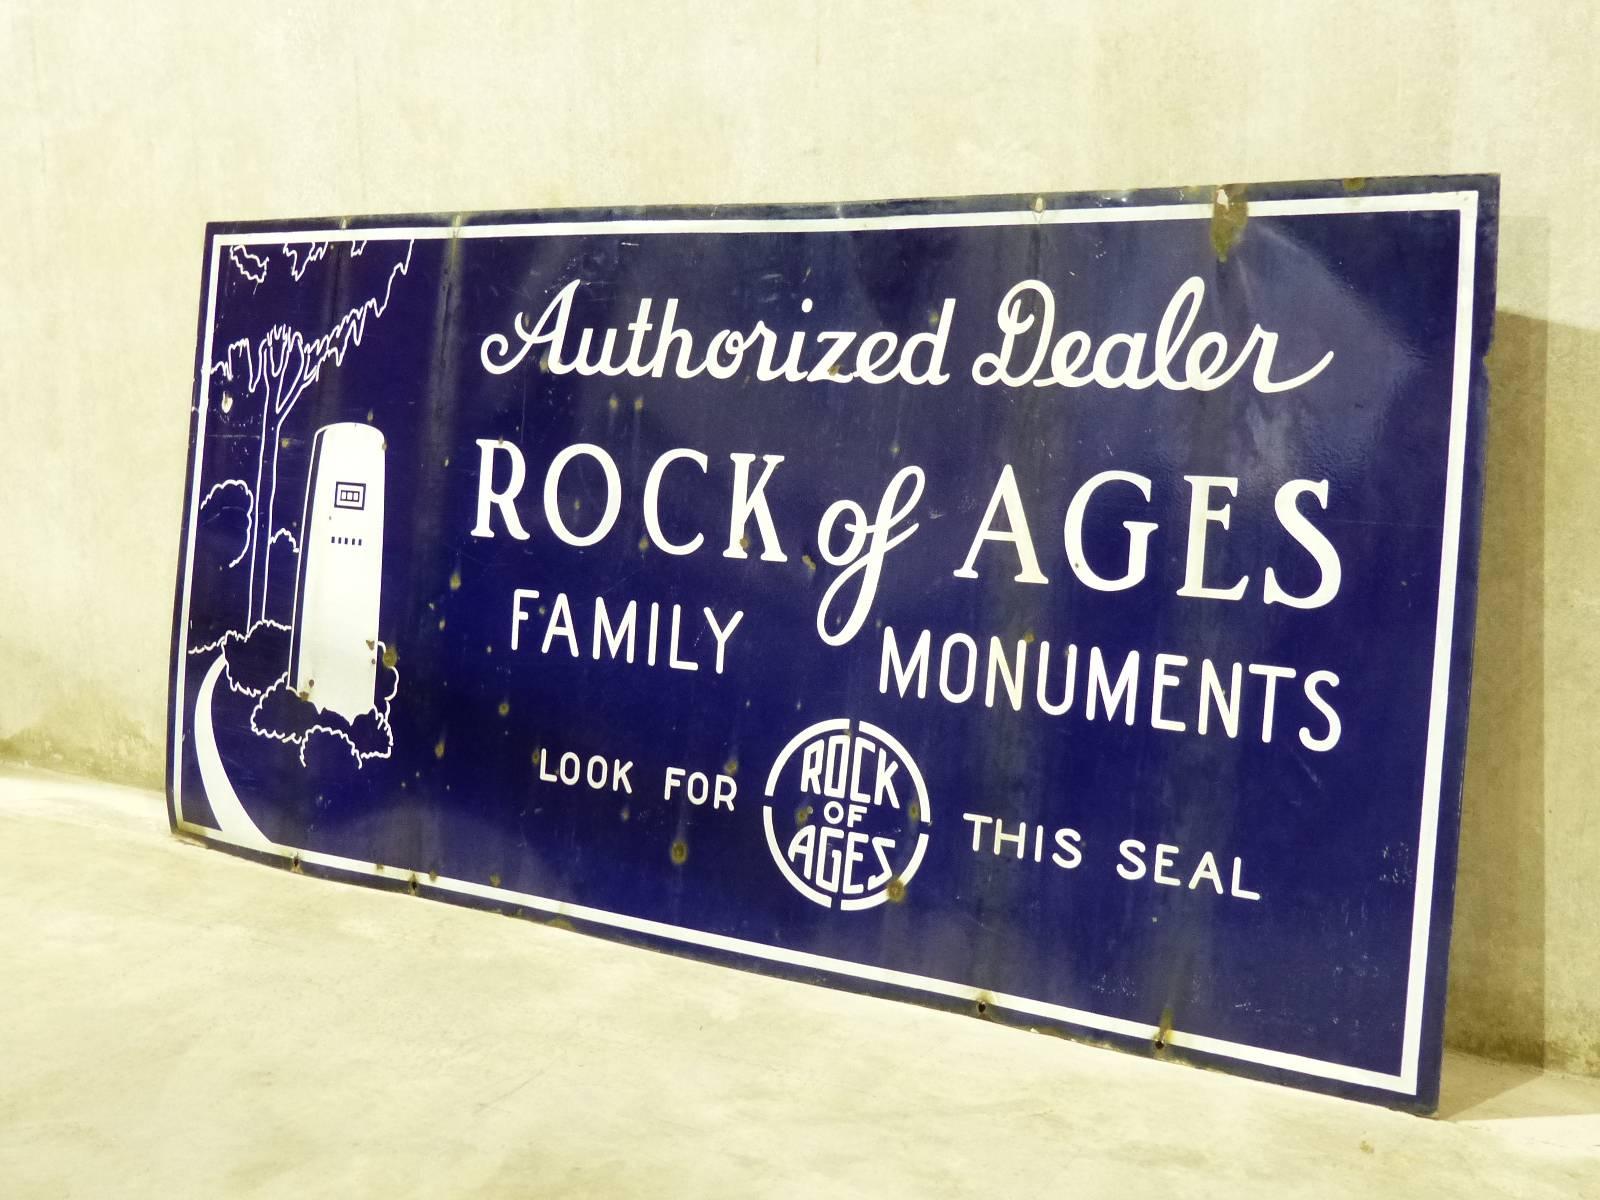 48H” x 96W” x 1D”
Monumental — four by eight foot — two-sided porcelain advertising sign, circa 1940. Nice colour; original condition. ‘Rock of Ages’ quarry company promoting its authorized dealers.